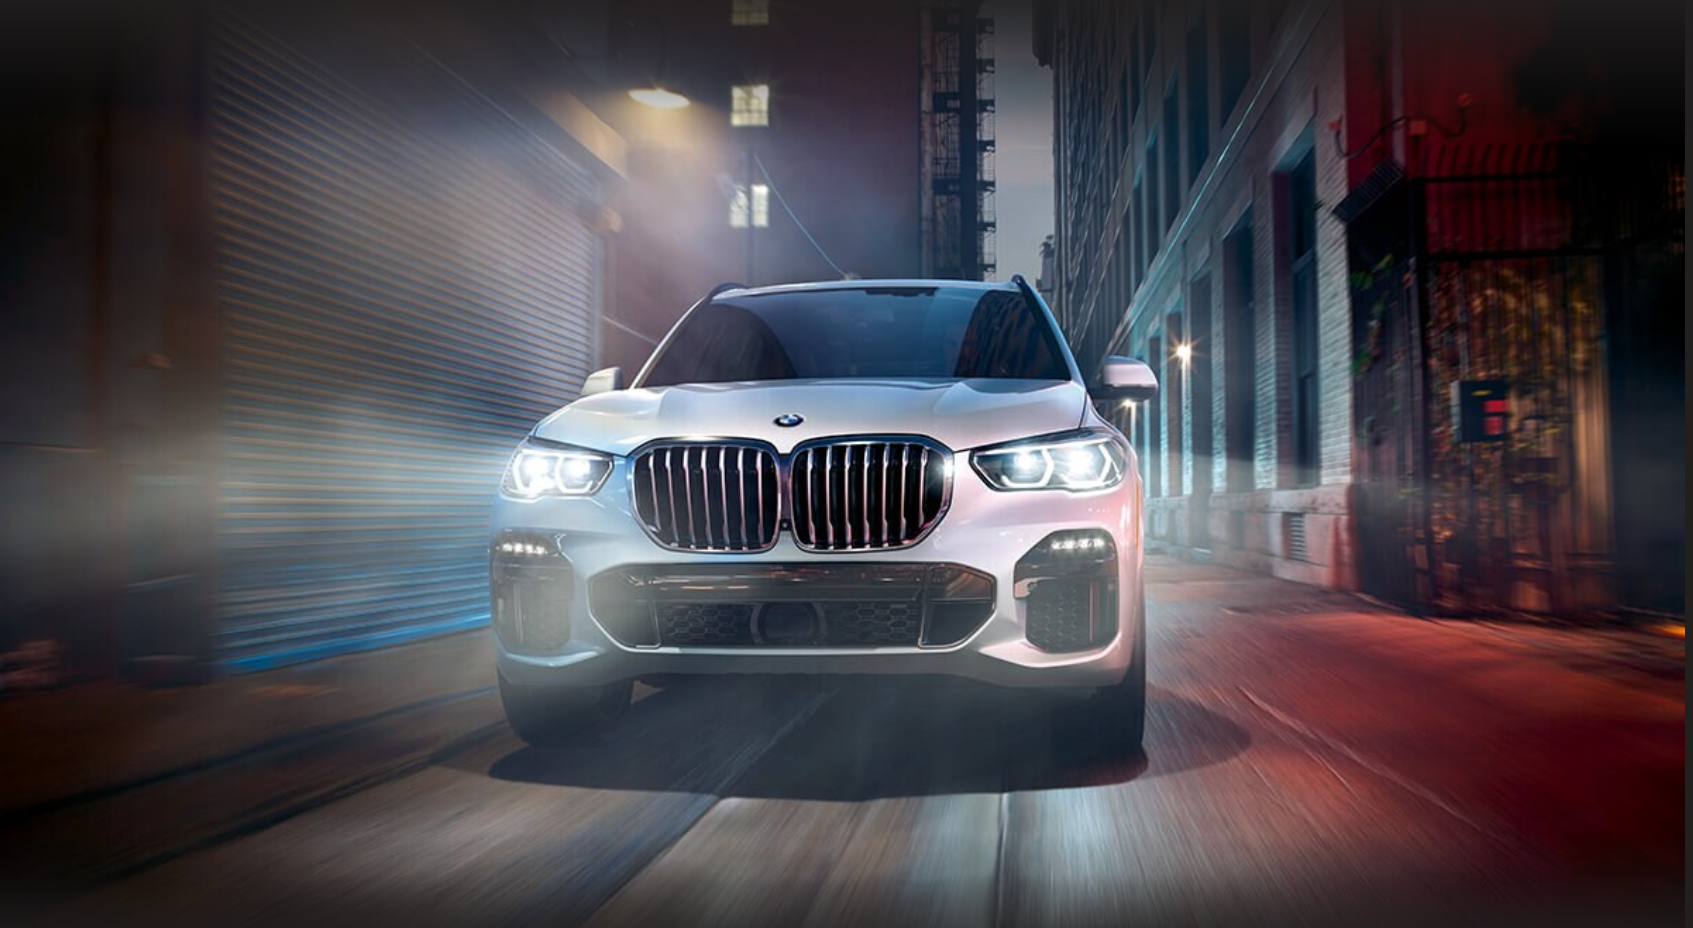 The 2020 BMW X5: Make Way For Dominant Design, Power, and Performance